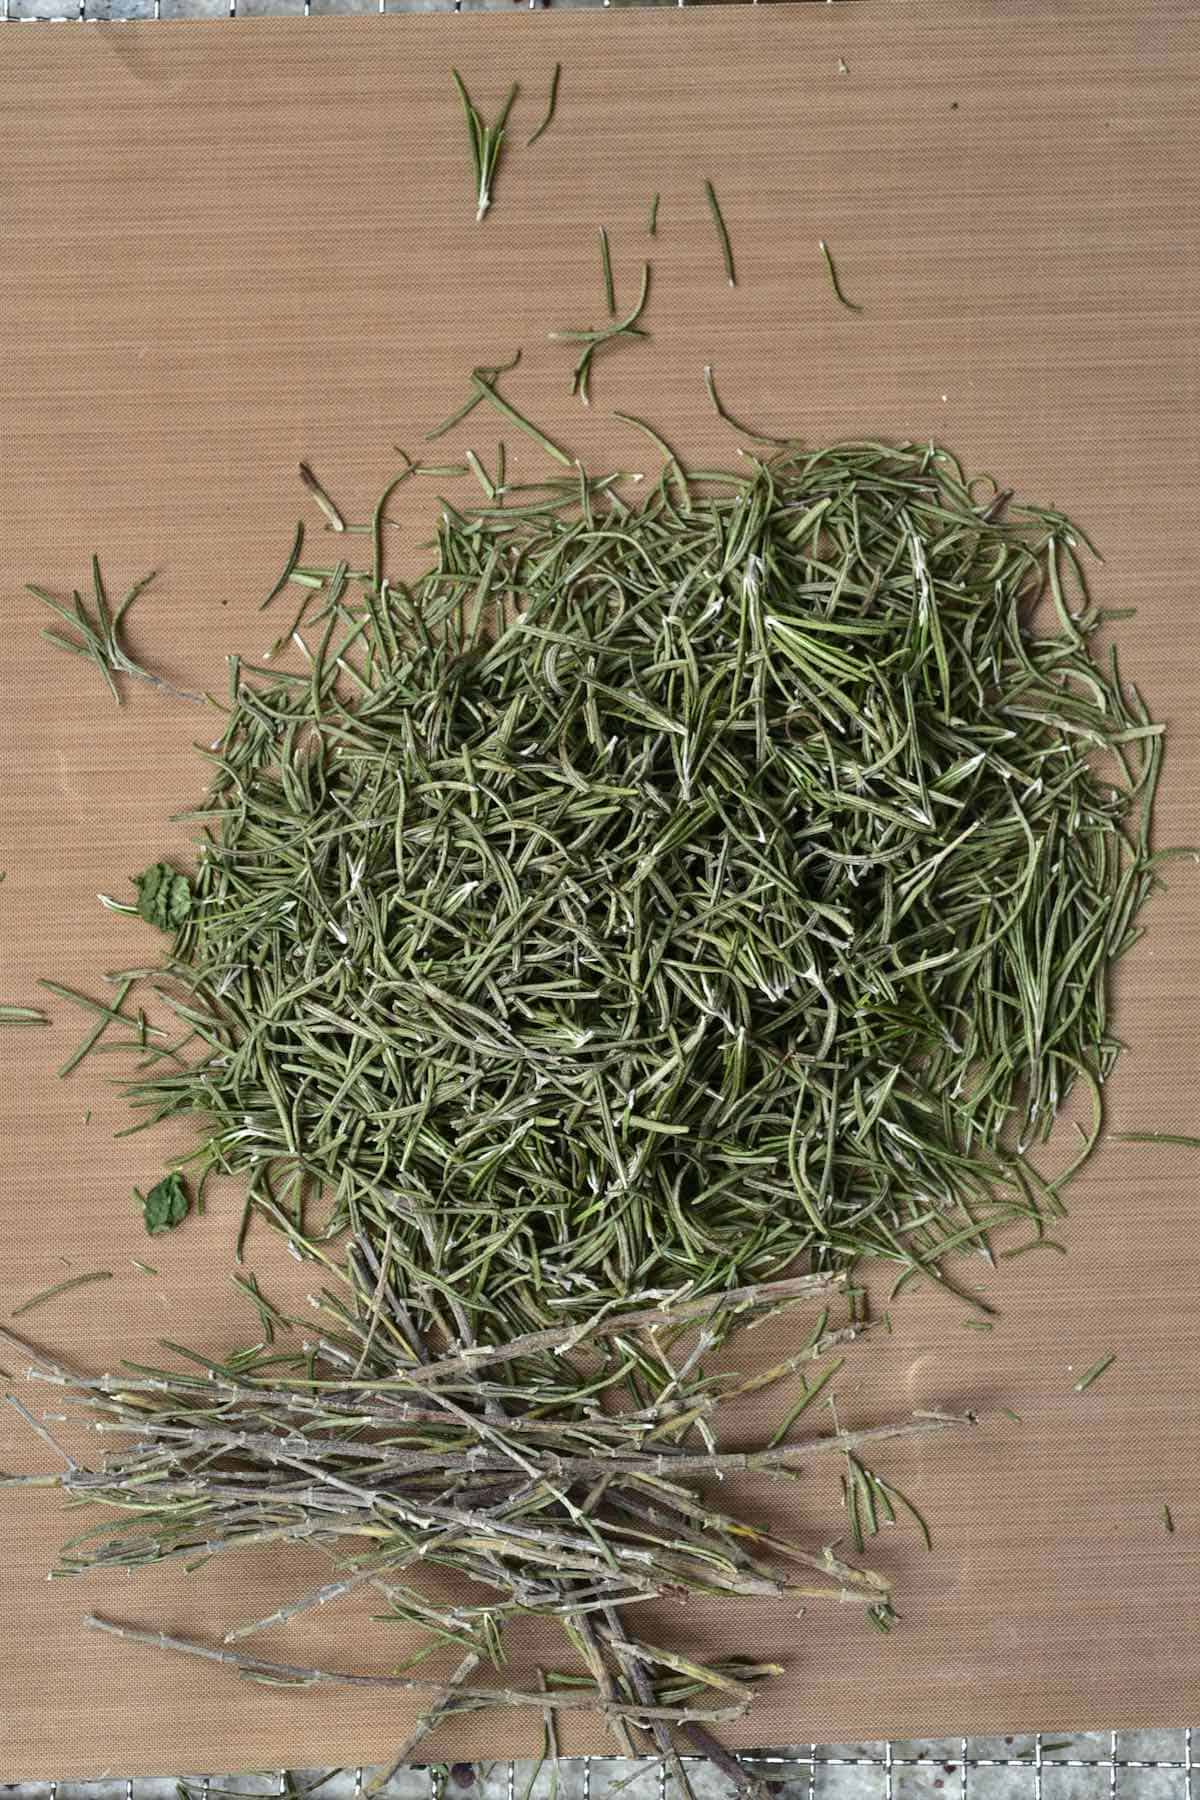 Dried rosemary with the stems removed